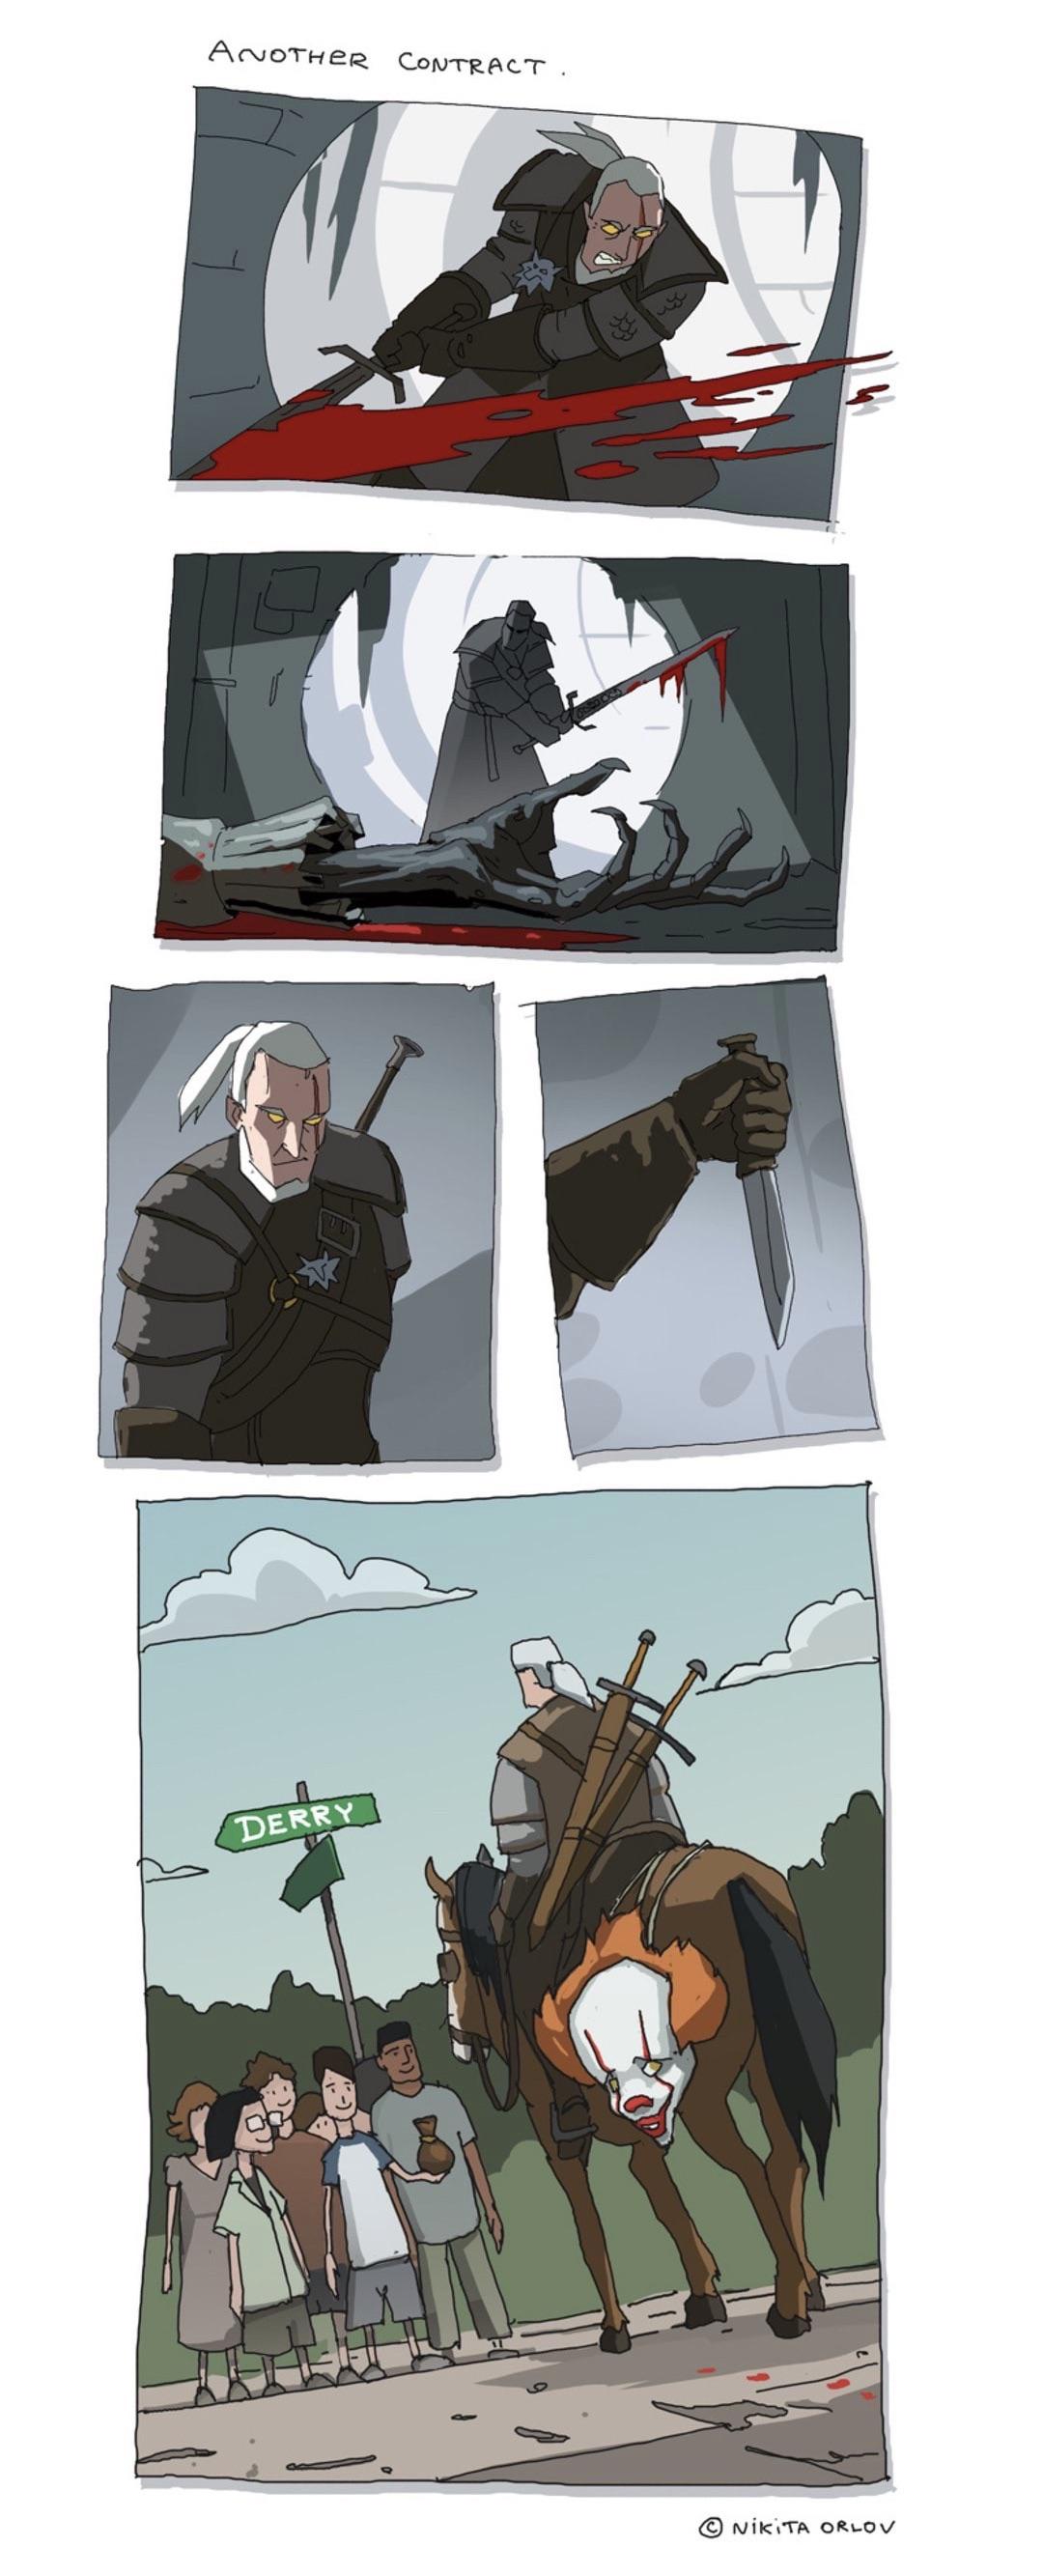 Witcher Contract - Comic